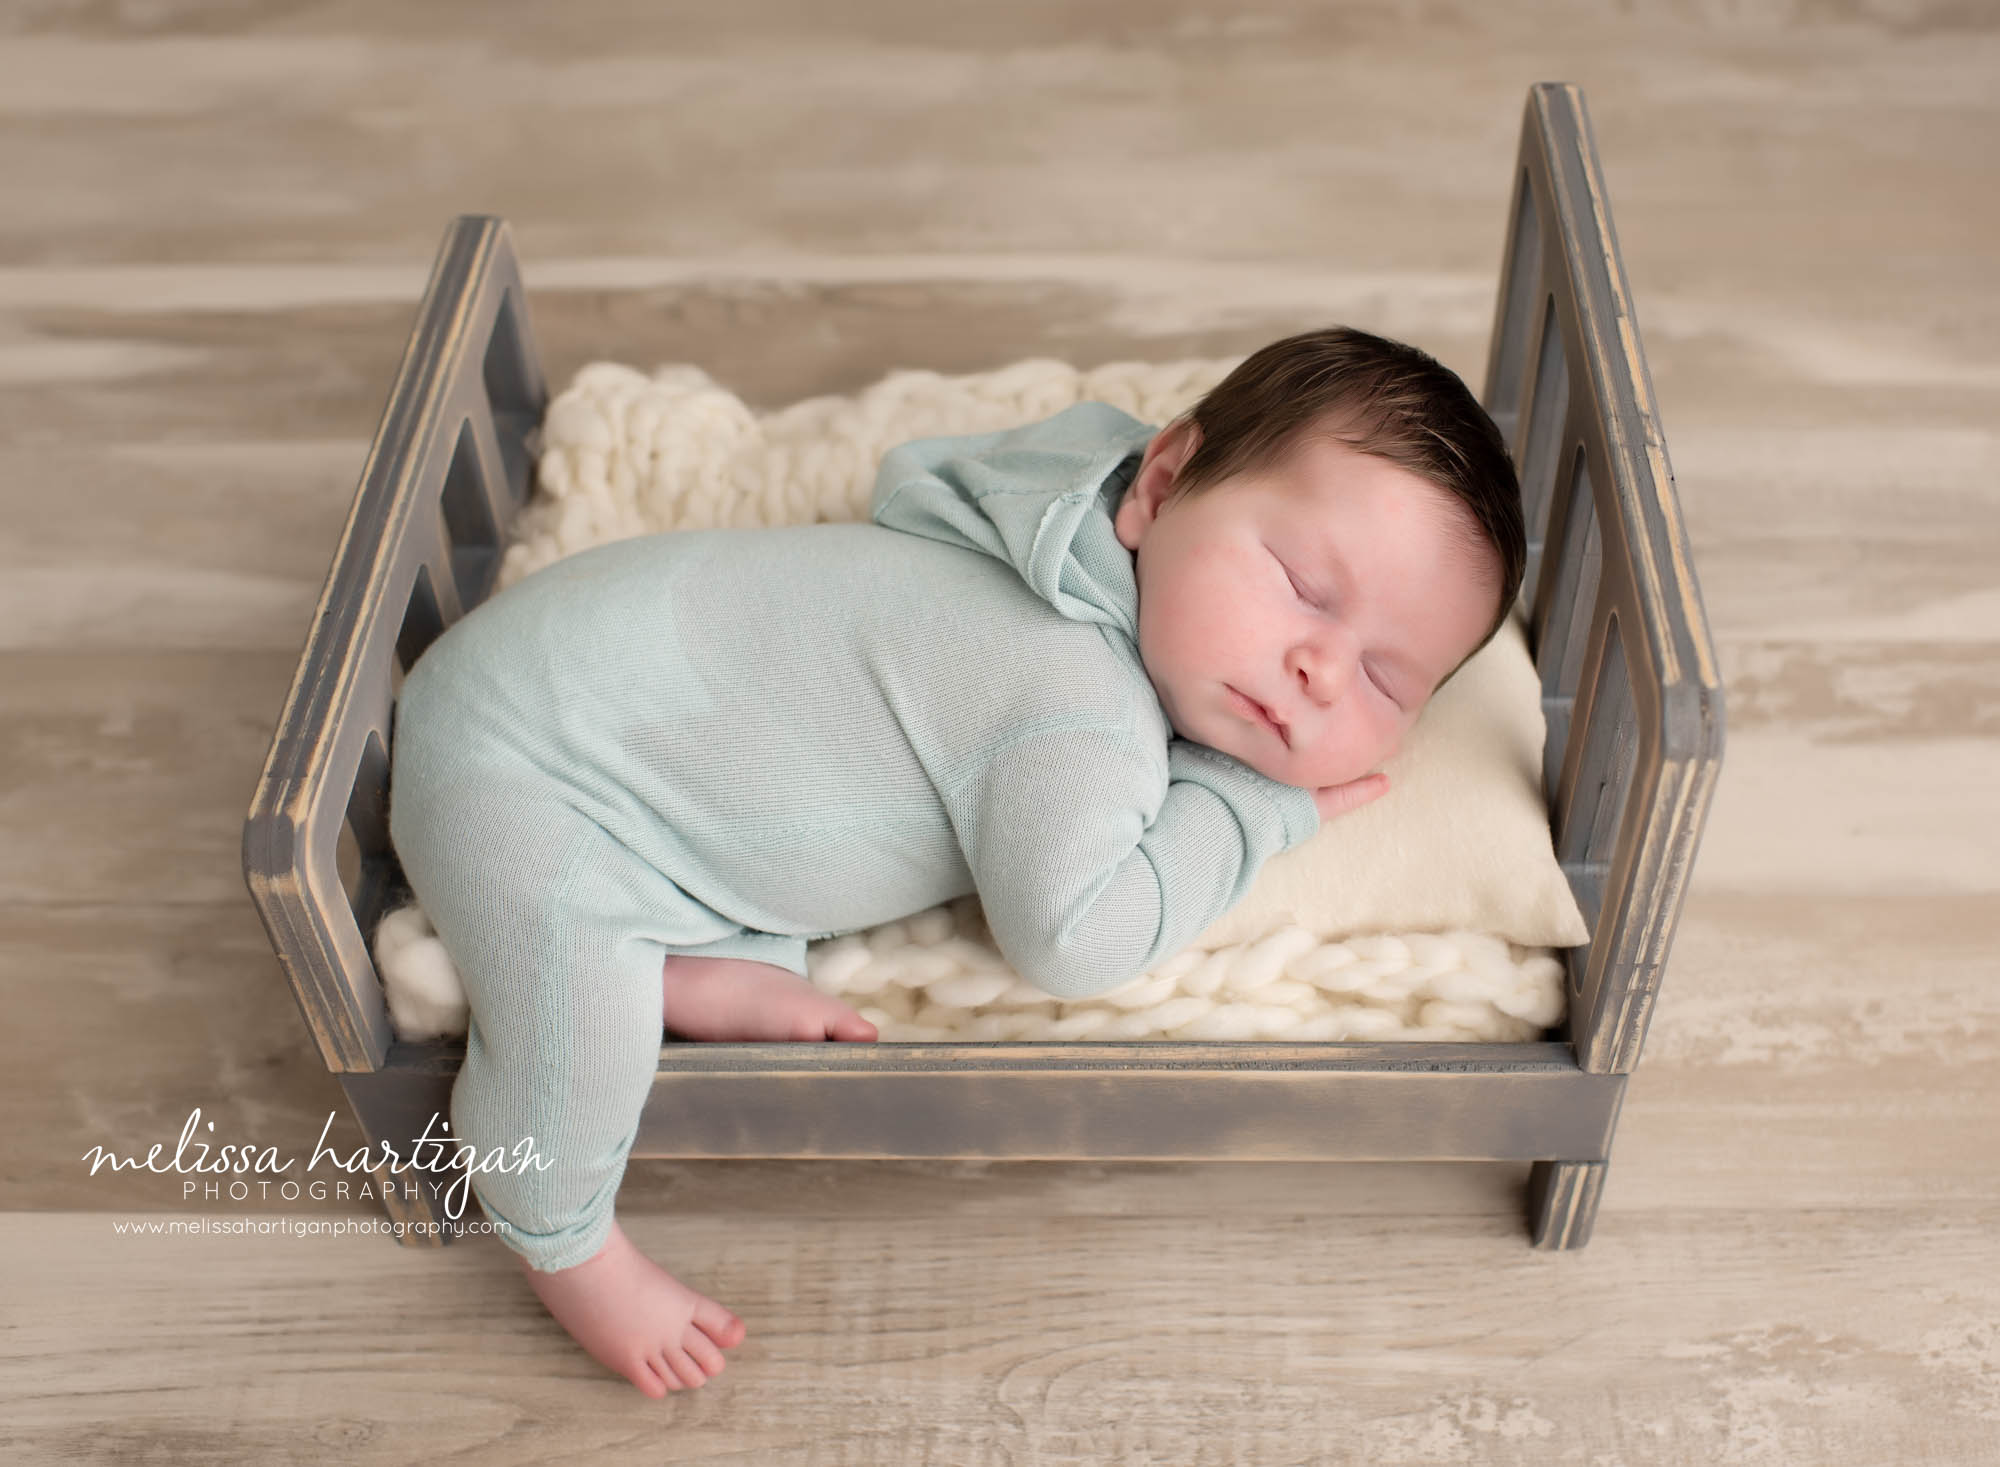 baby boy wearing light blue outfit posed on wooden bed